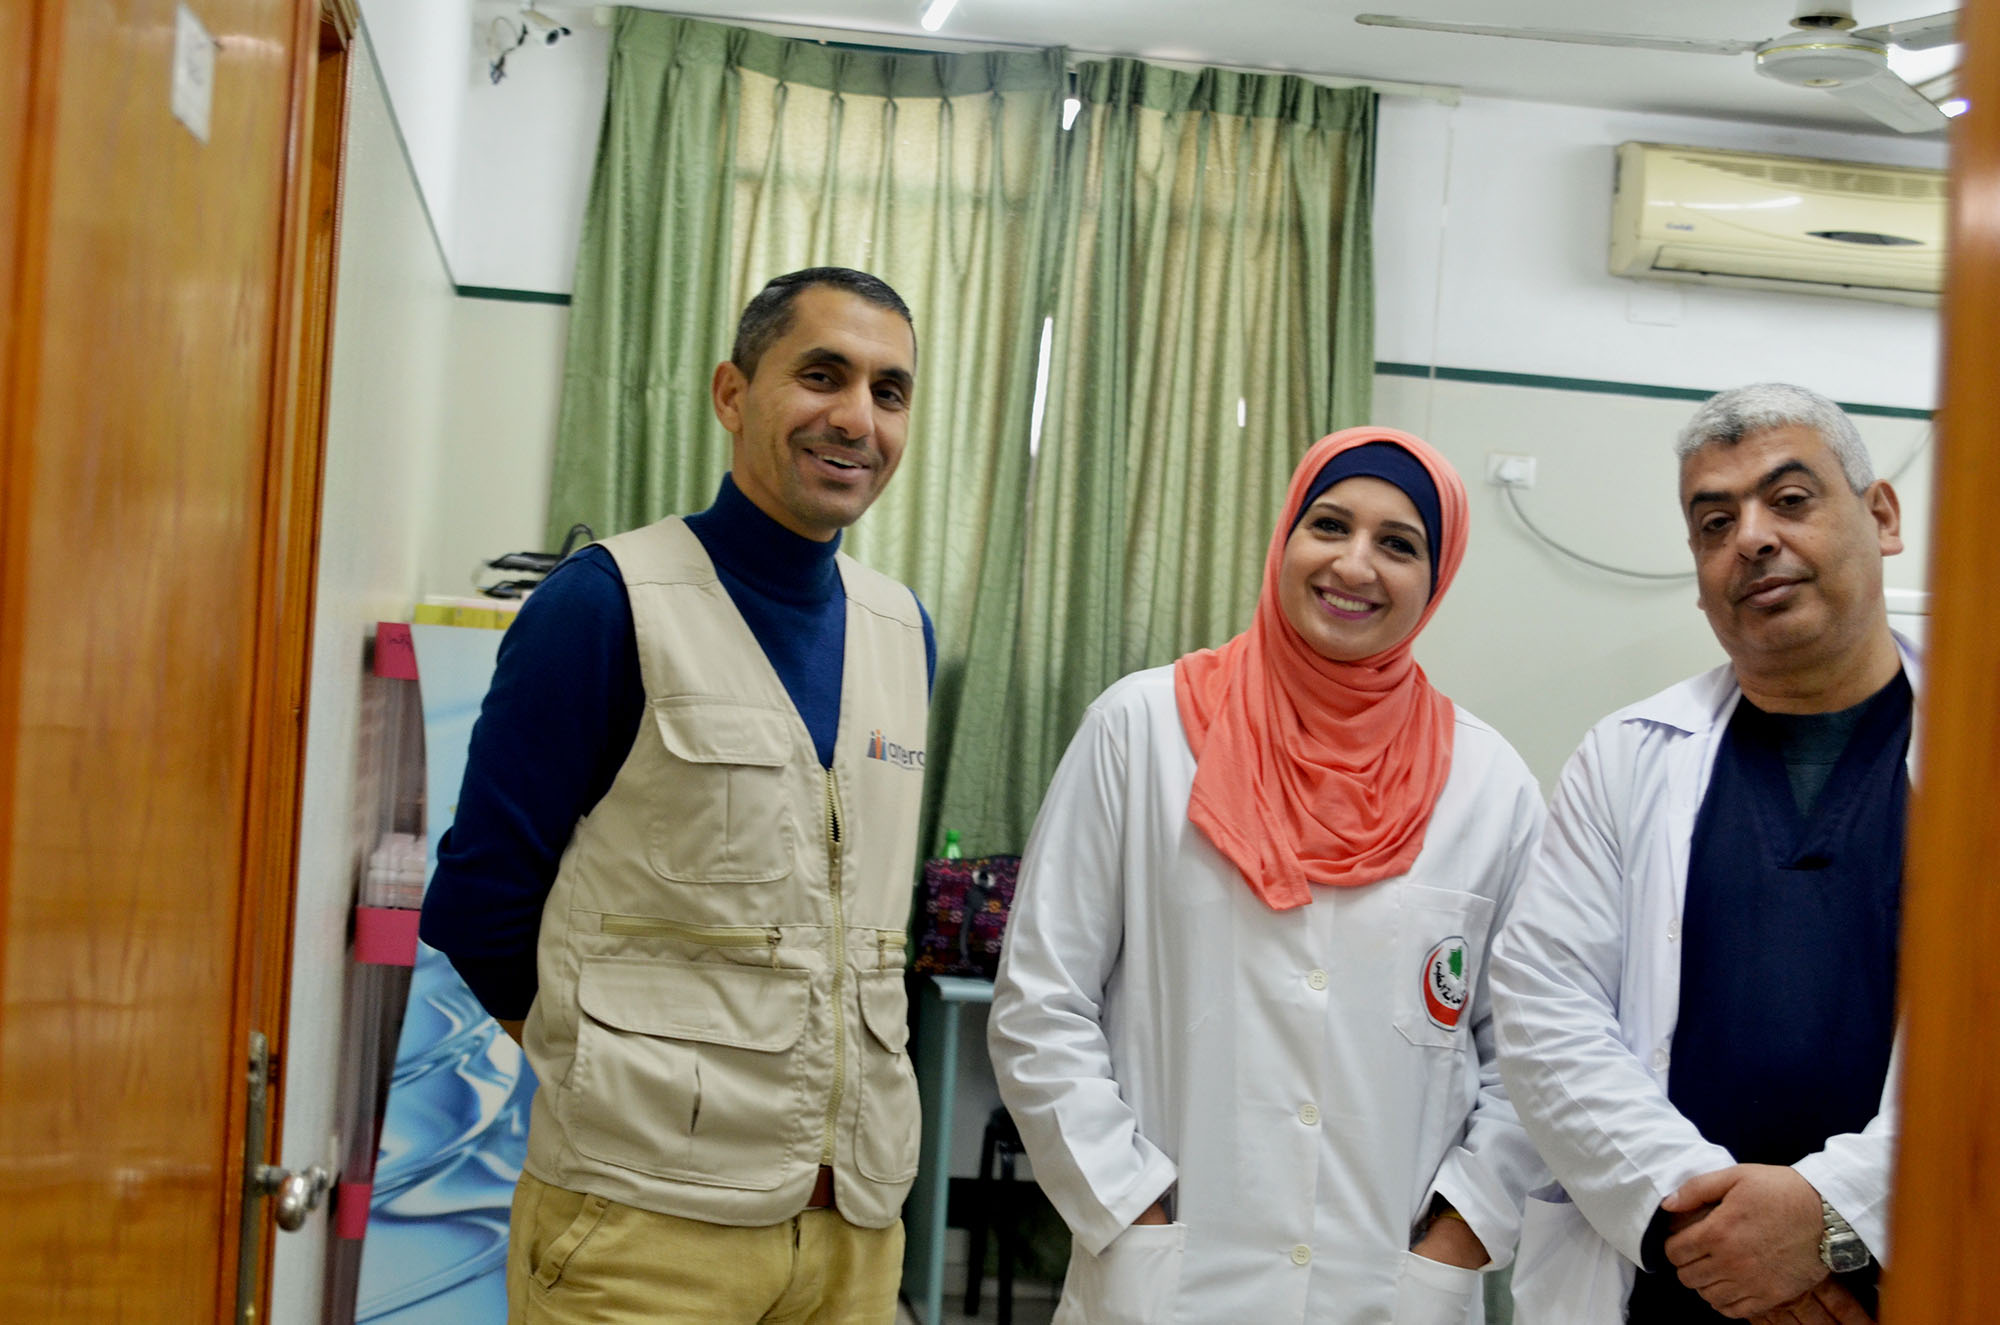 Anera staff with pharmacist Hind Abu Jahal and obstetrician Dr. Ziyad Siam at Al Sahaba in Gaza.